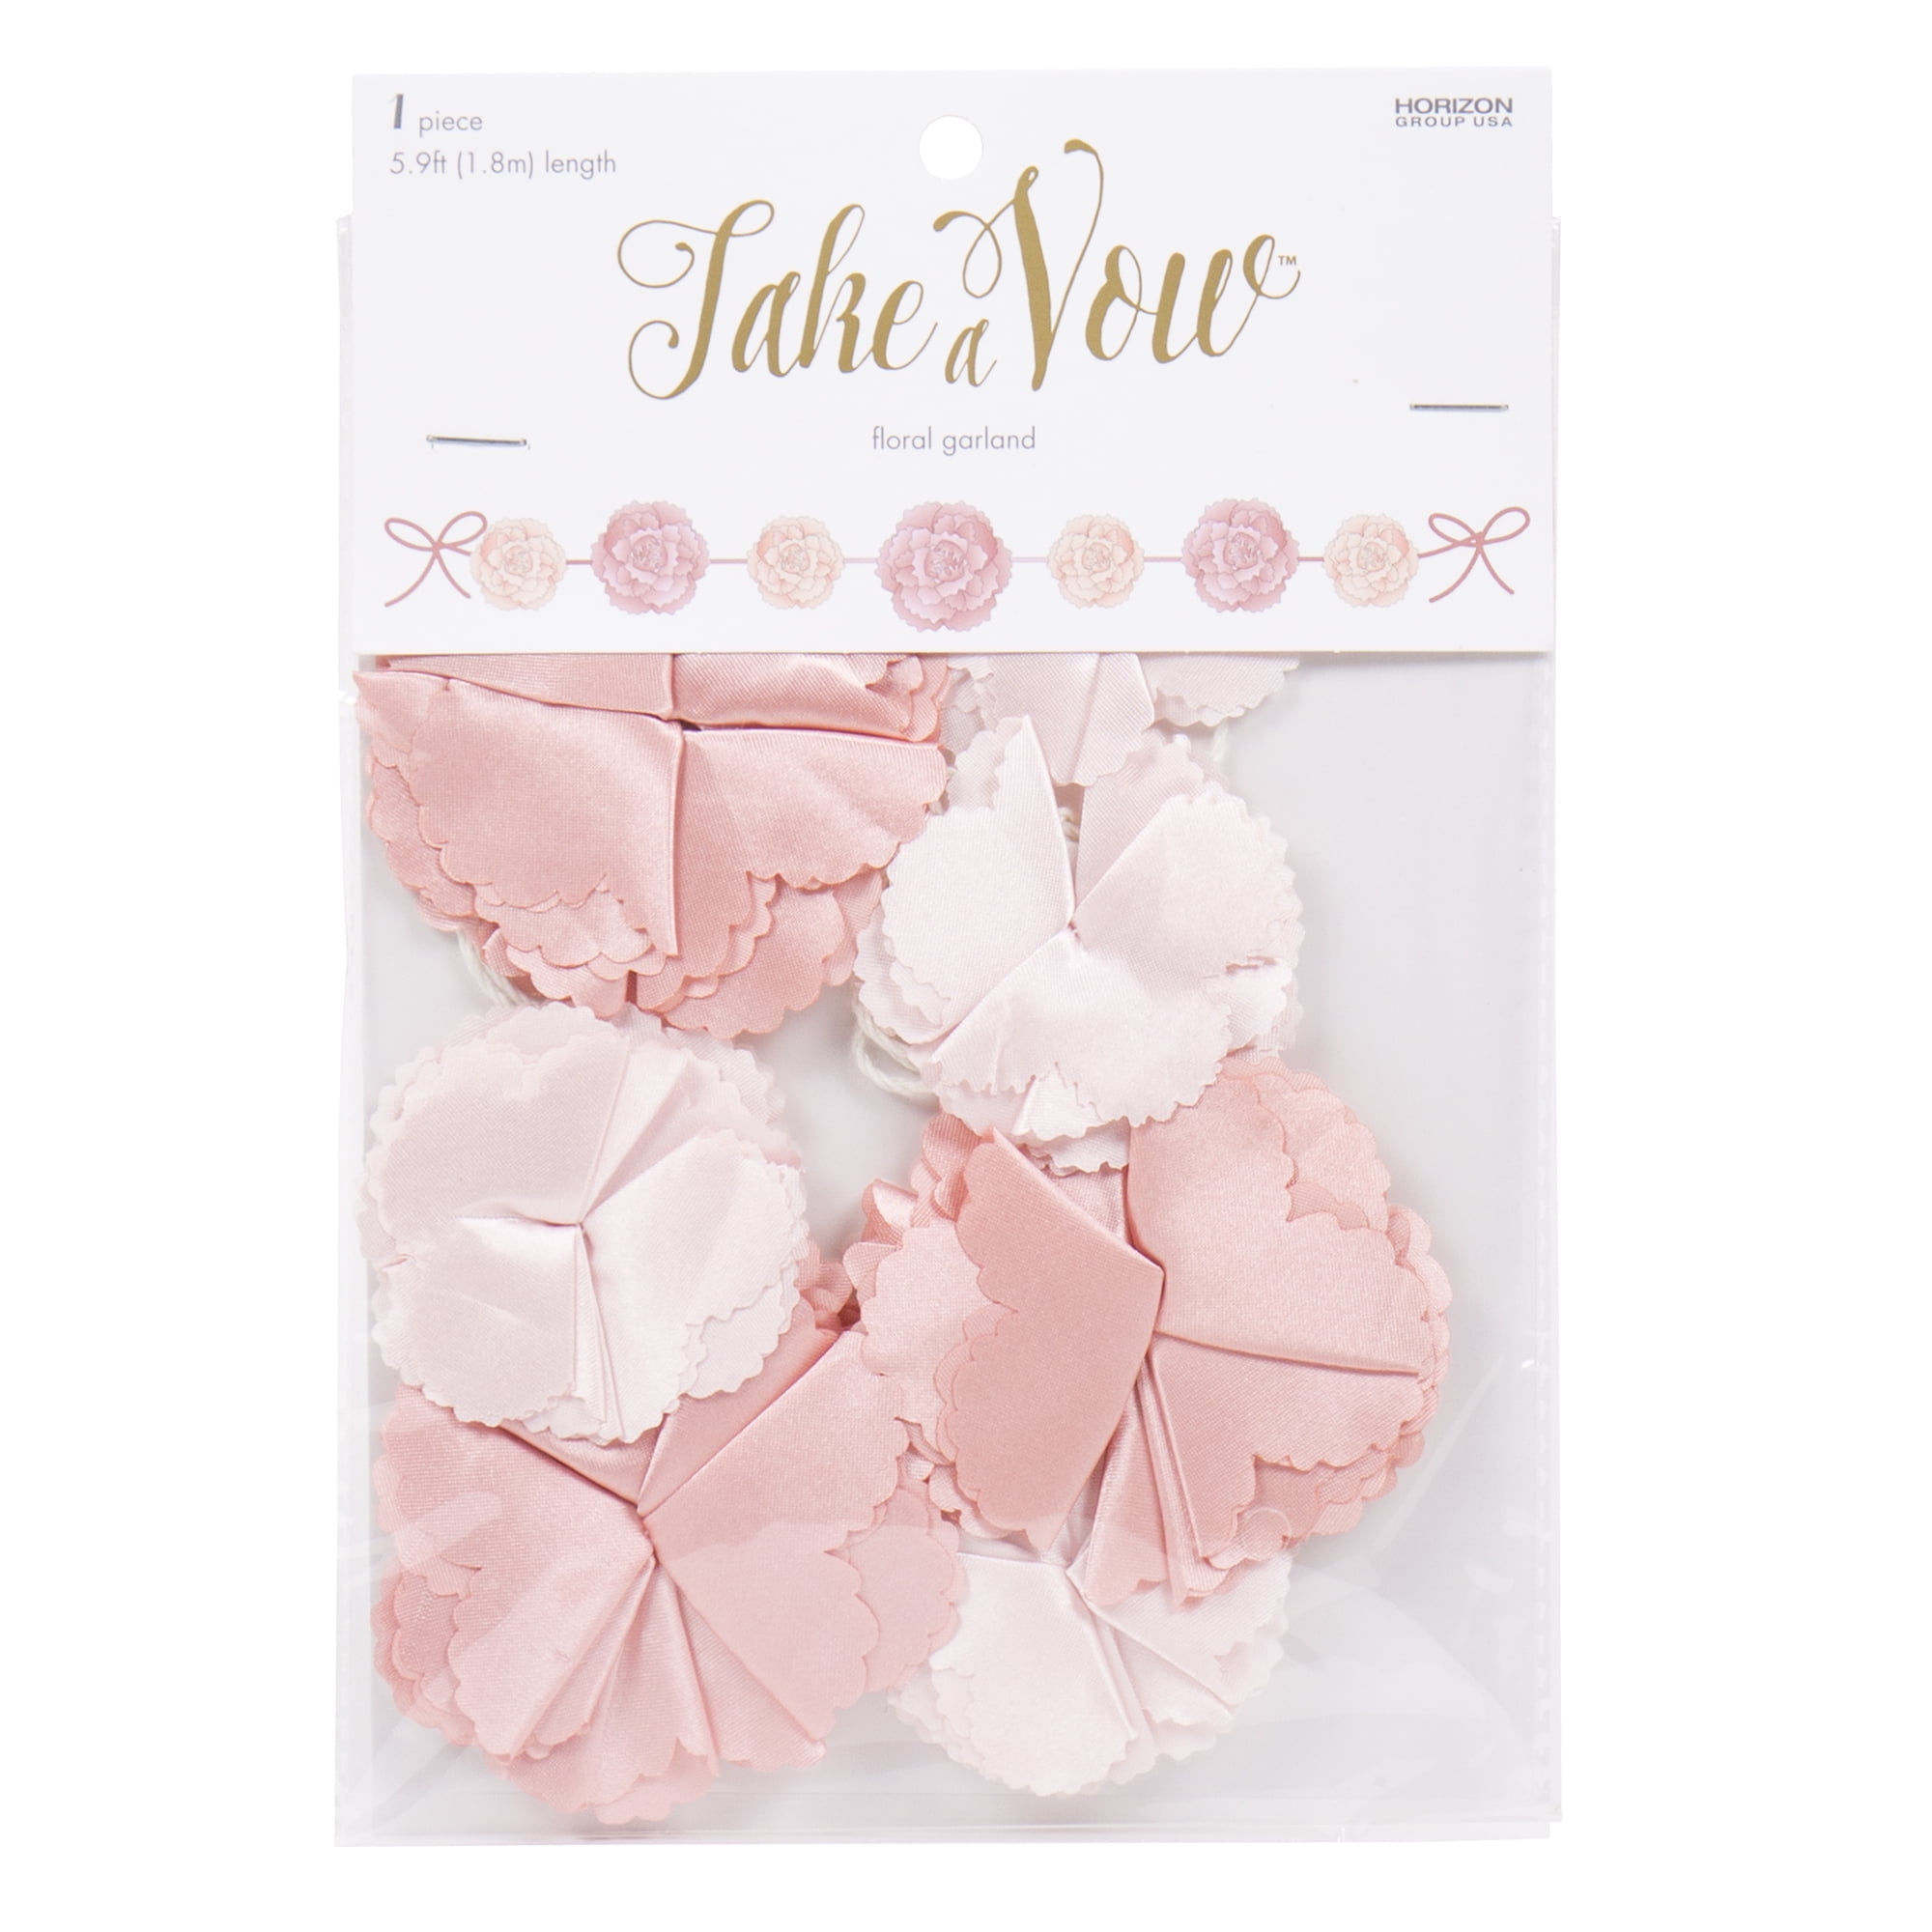 Take a Vow Pink and Peach Satin Flower Garland, 5.9 ft., All Occasions